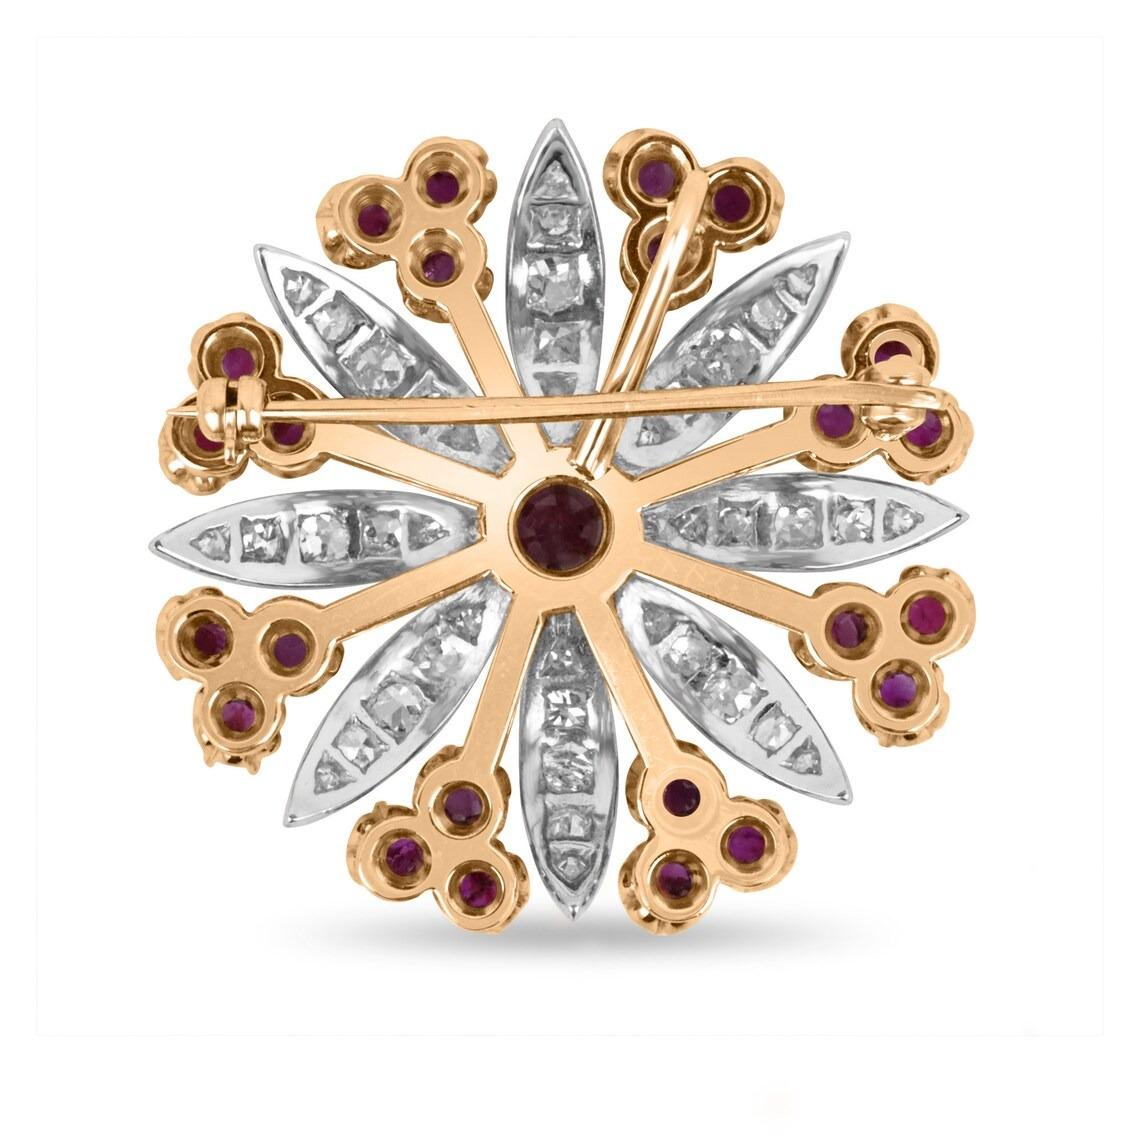 You have stumbled across an absolute treasure of an item. This masterpiece features almost three carats, of 1890s old mine rubies, cut into the shape of a round and prong set across the entire piece. Numerous round-cut diamonds are pave-set within